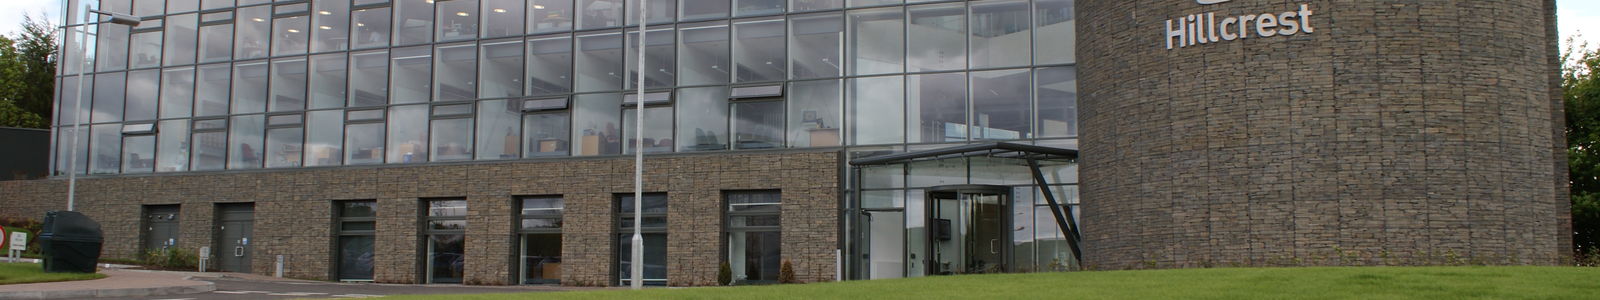 Hillcrest Offices